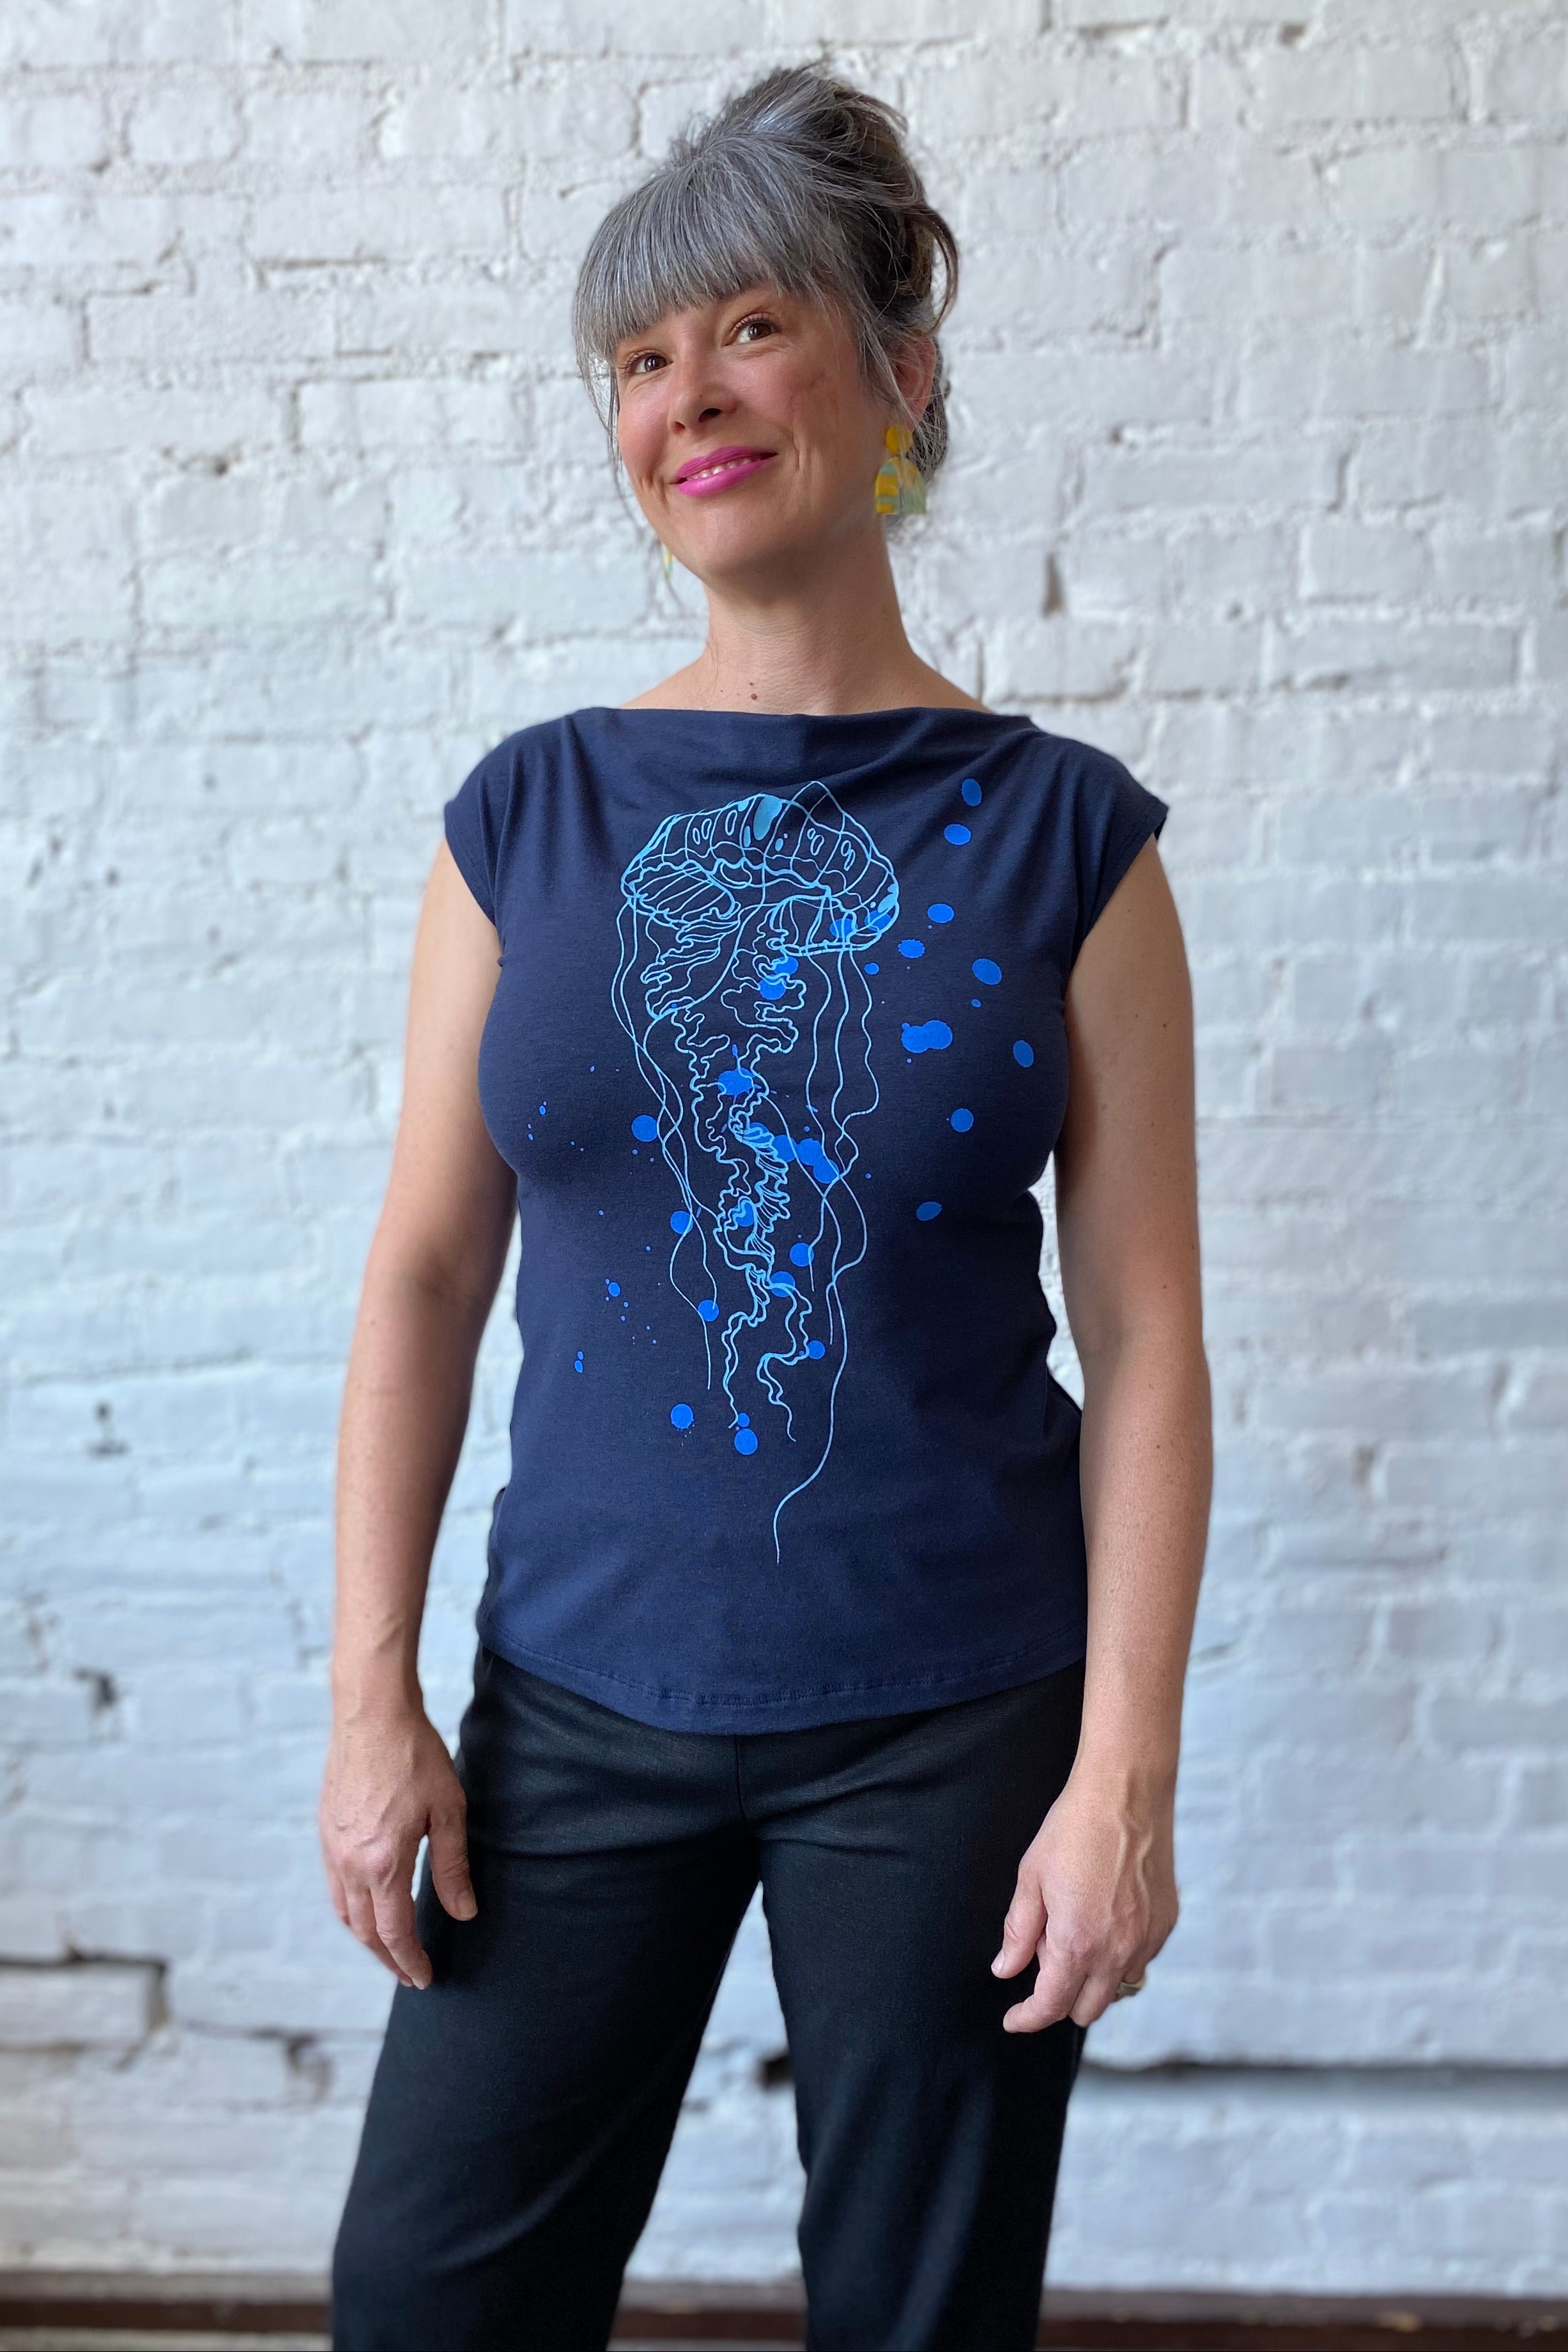 Smiling woman models sleeveless tee with large jellyfish print on front of shirt.